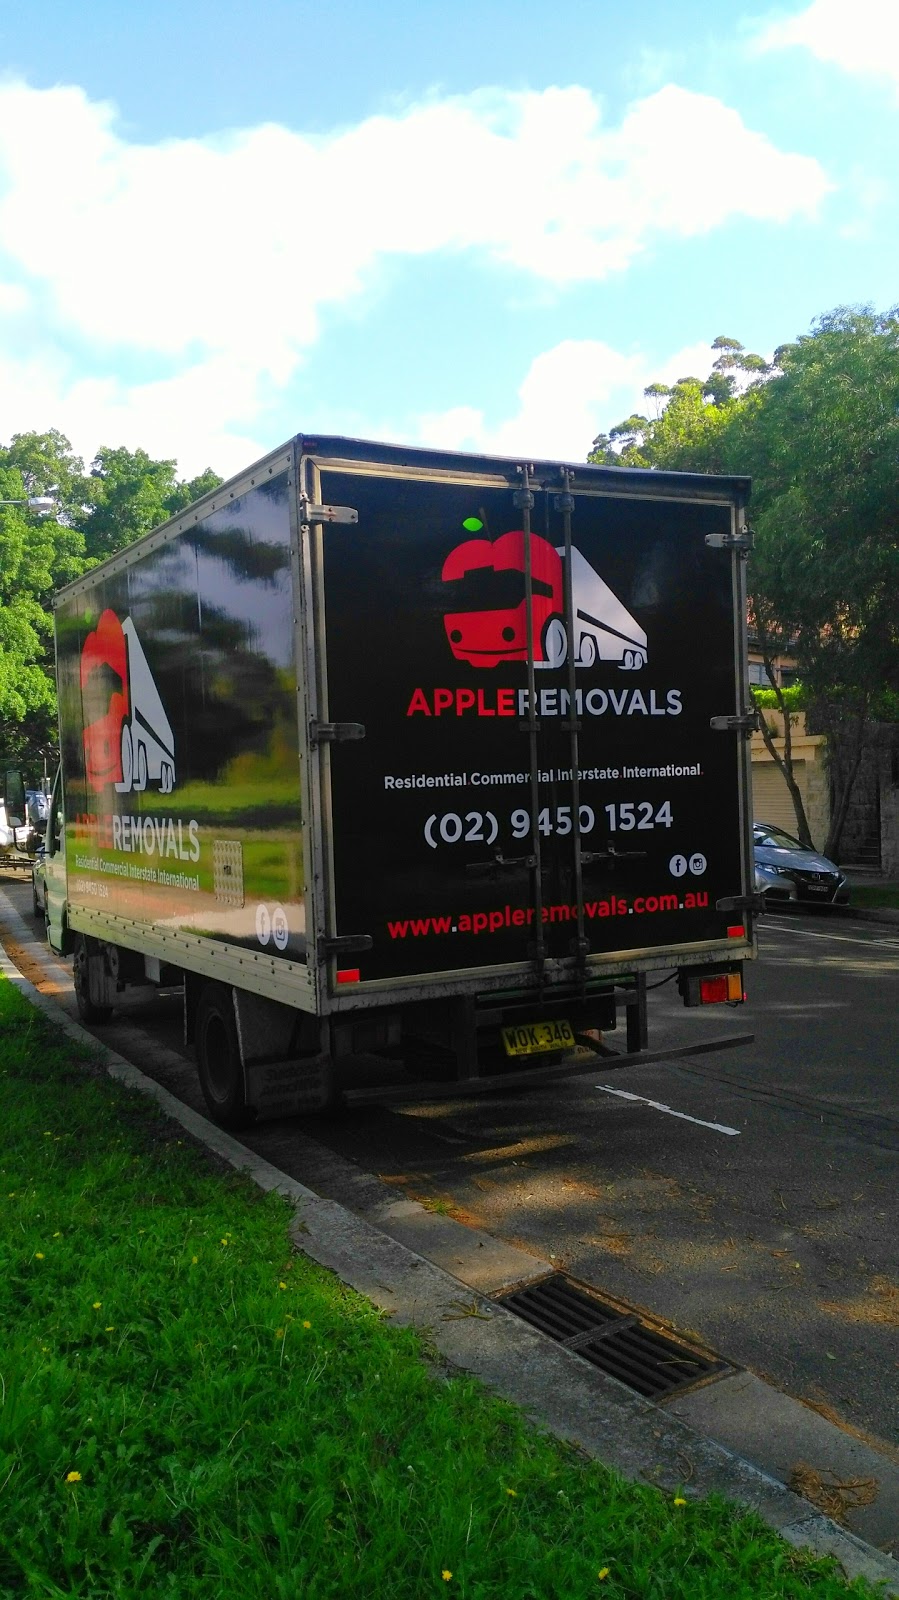 Apple Removals | 198 Forest Way, Belrose NSW 2085, Australia | Phone: (02) 9450 1524